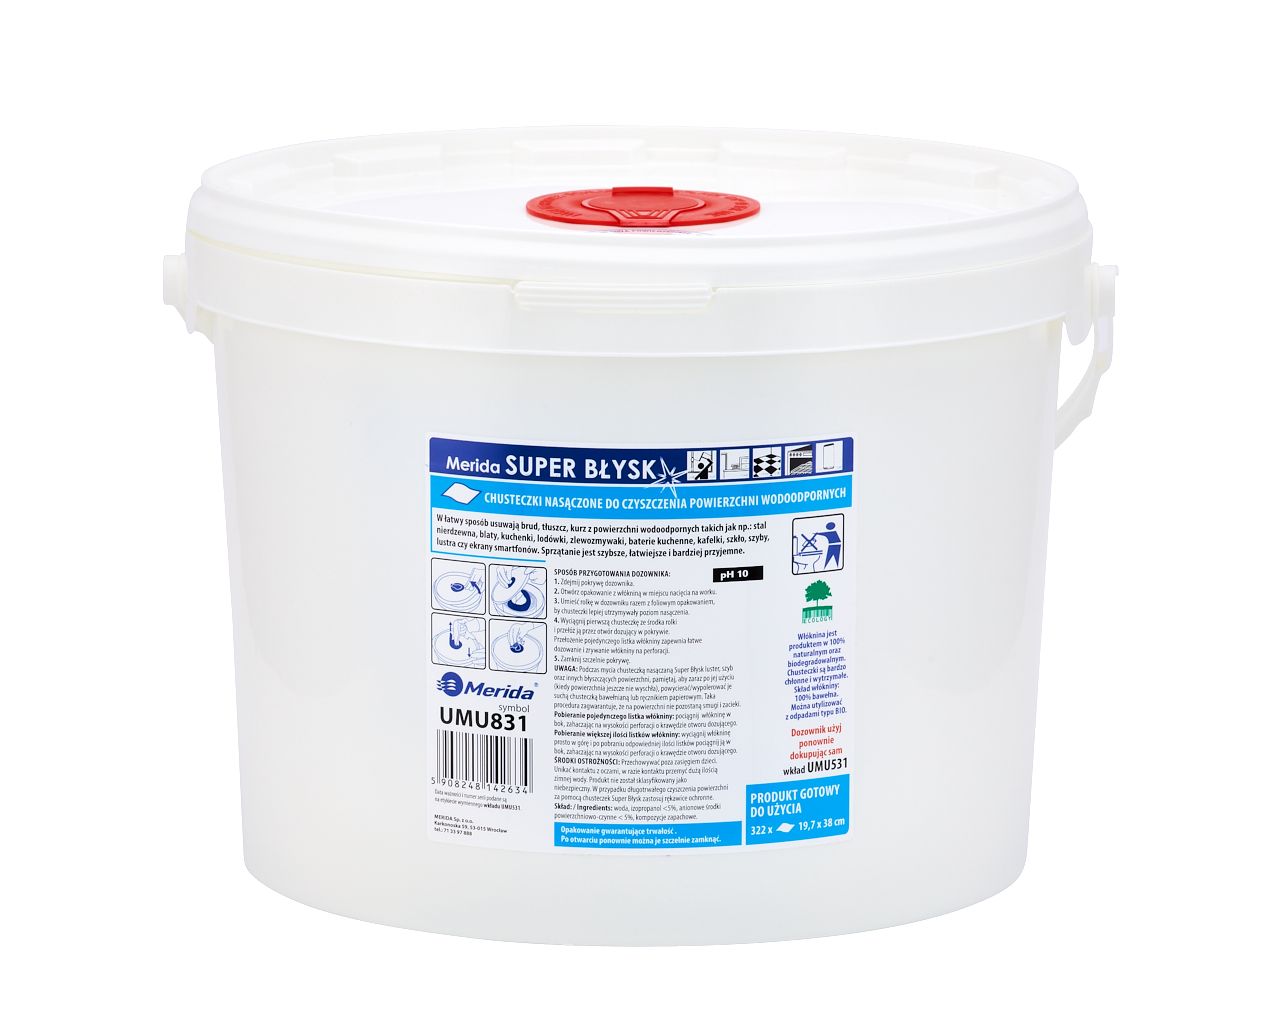 MERIDA SUPER BŁYSK wet wipes for cleaning waterproof surfaces, bucket 10 l, roll 122.36 m, 322 sheets